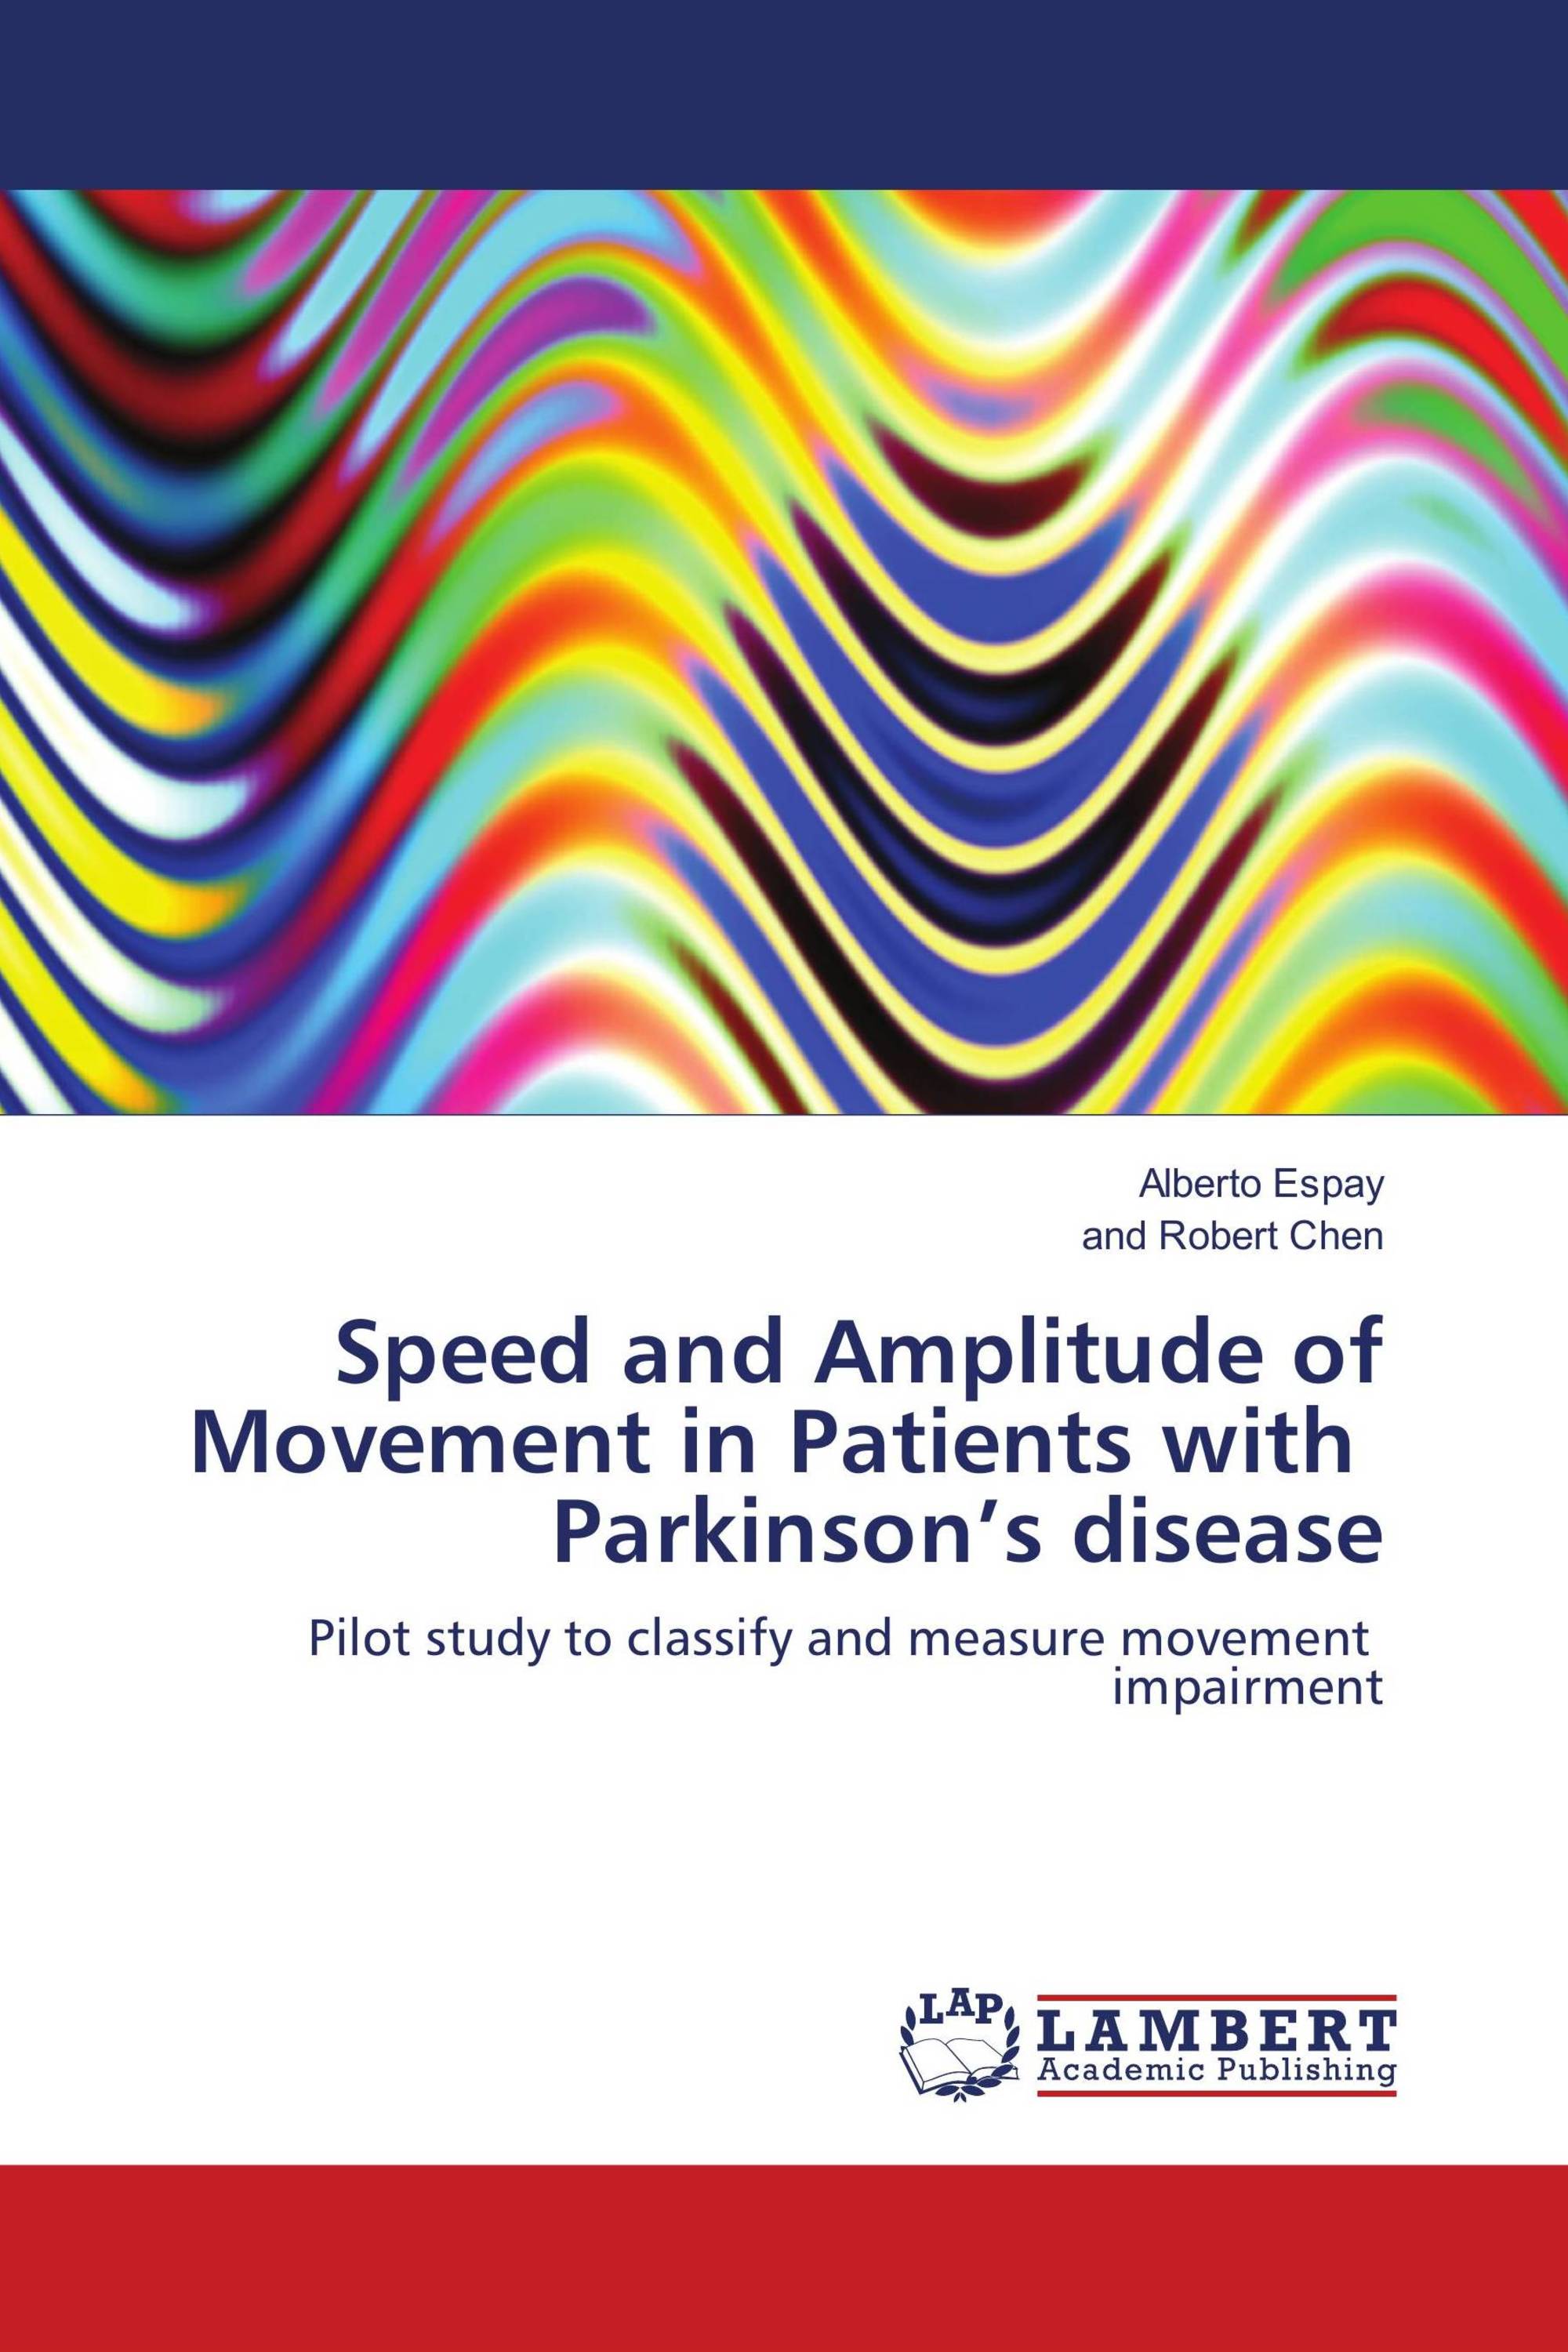 Speed and Amplitude of Movement in Patients with Parkinson’s disease